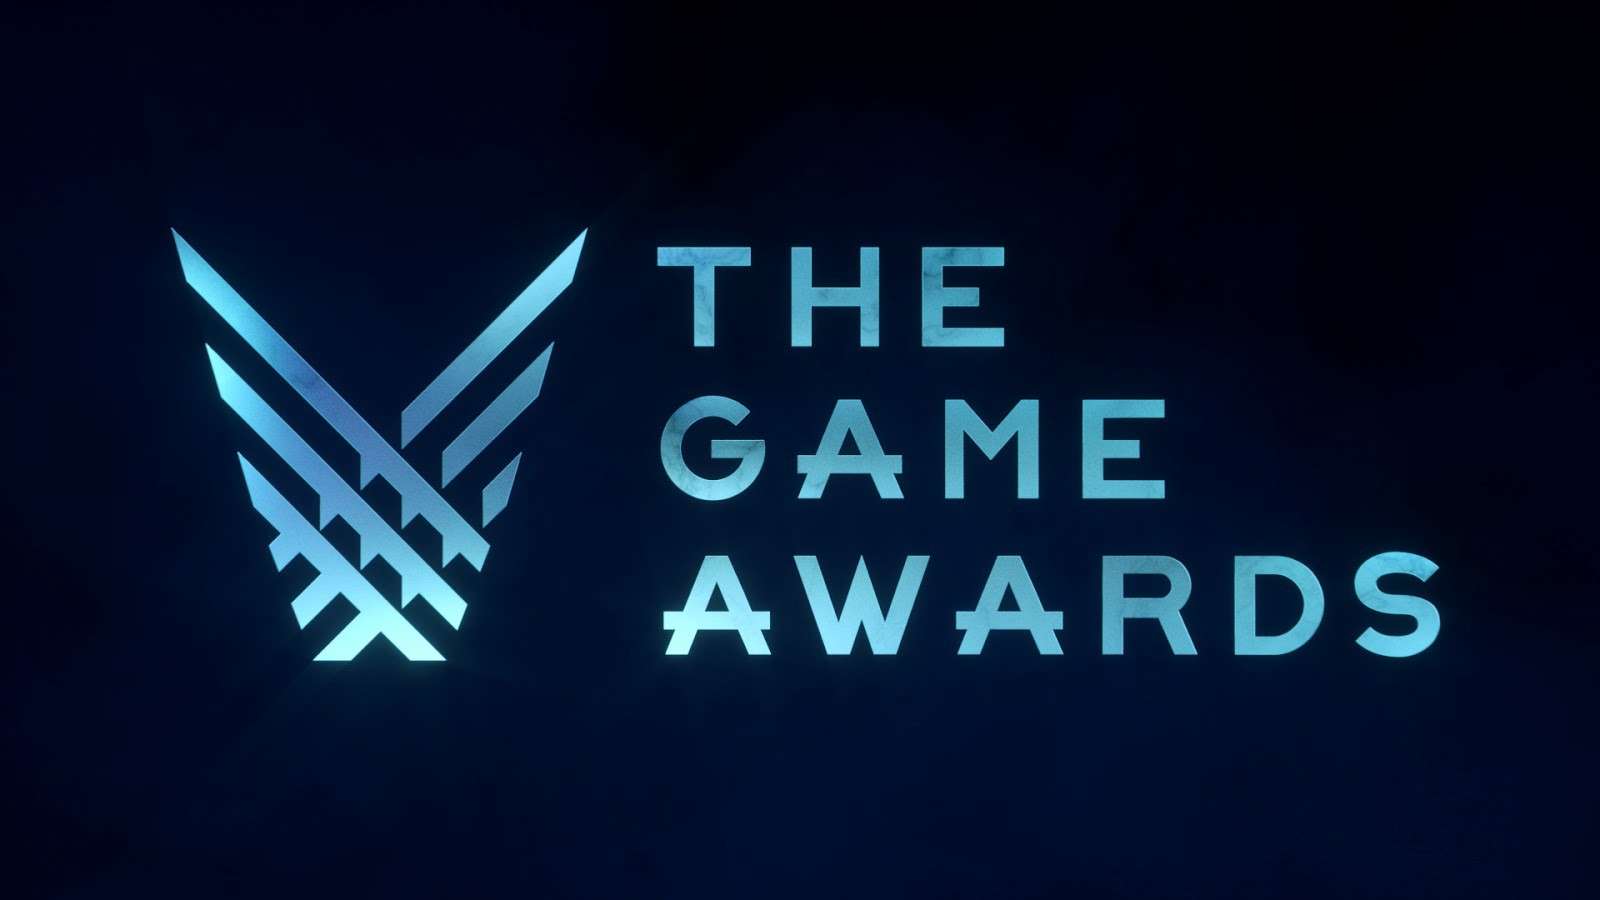 The Game Adwards 2018